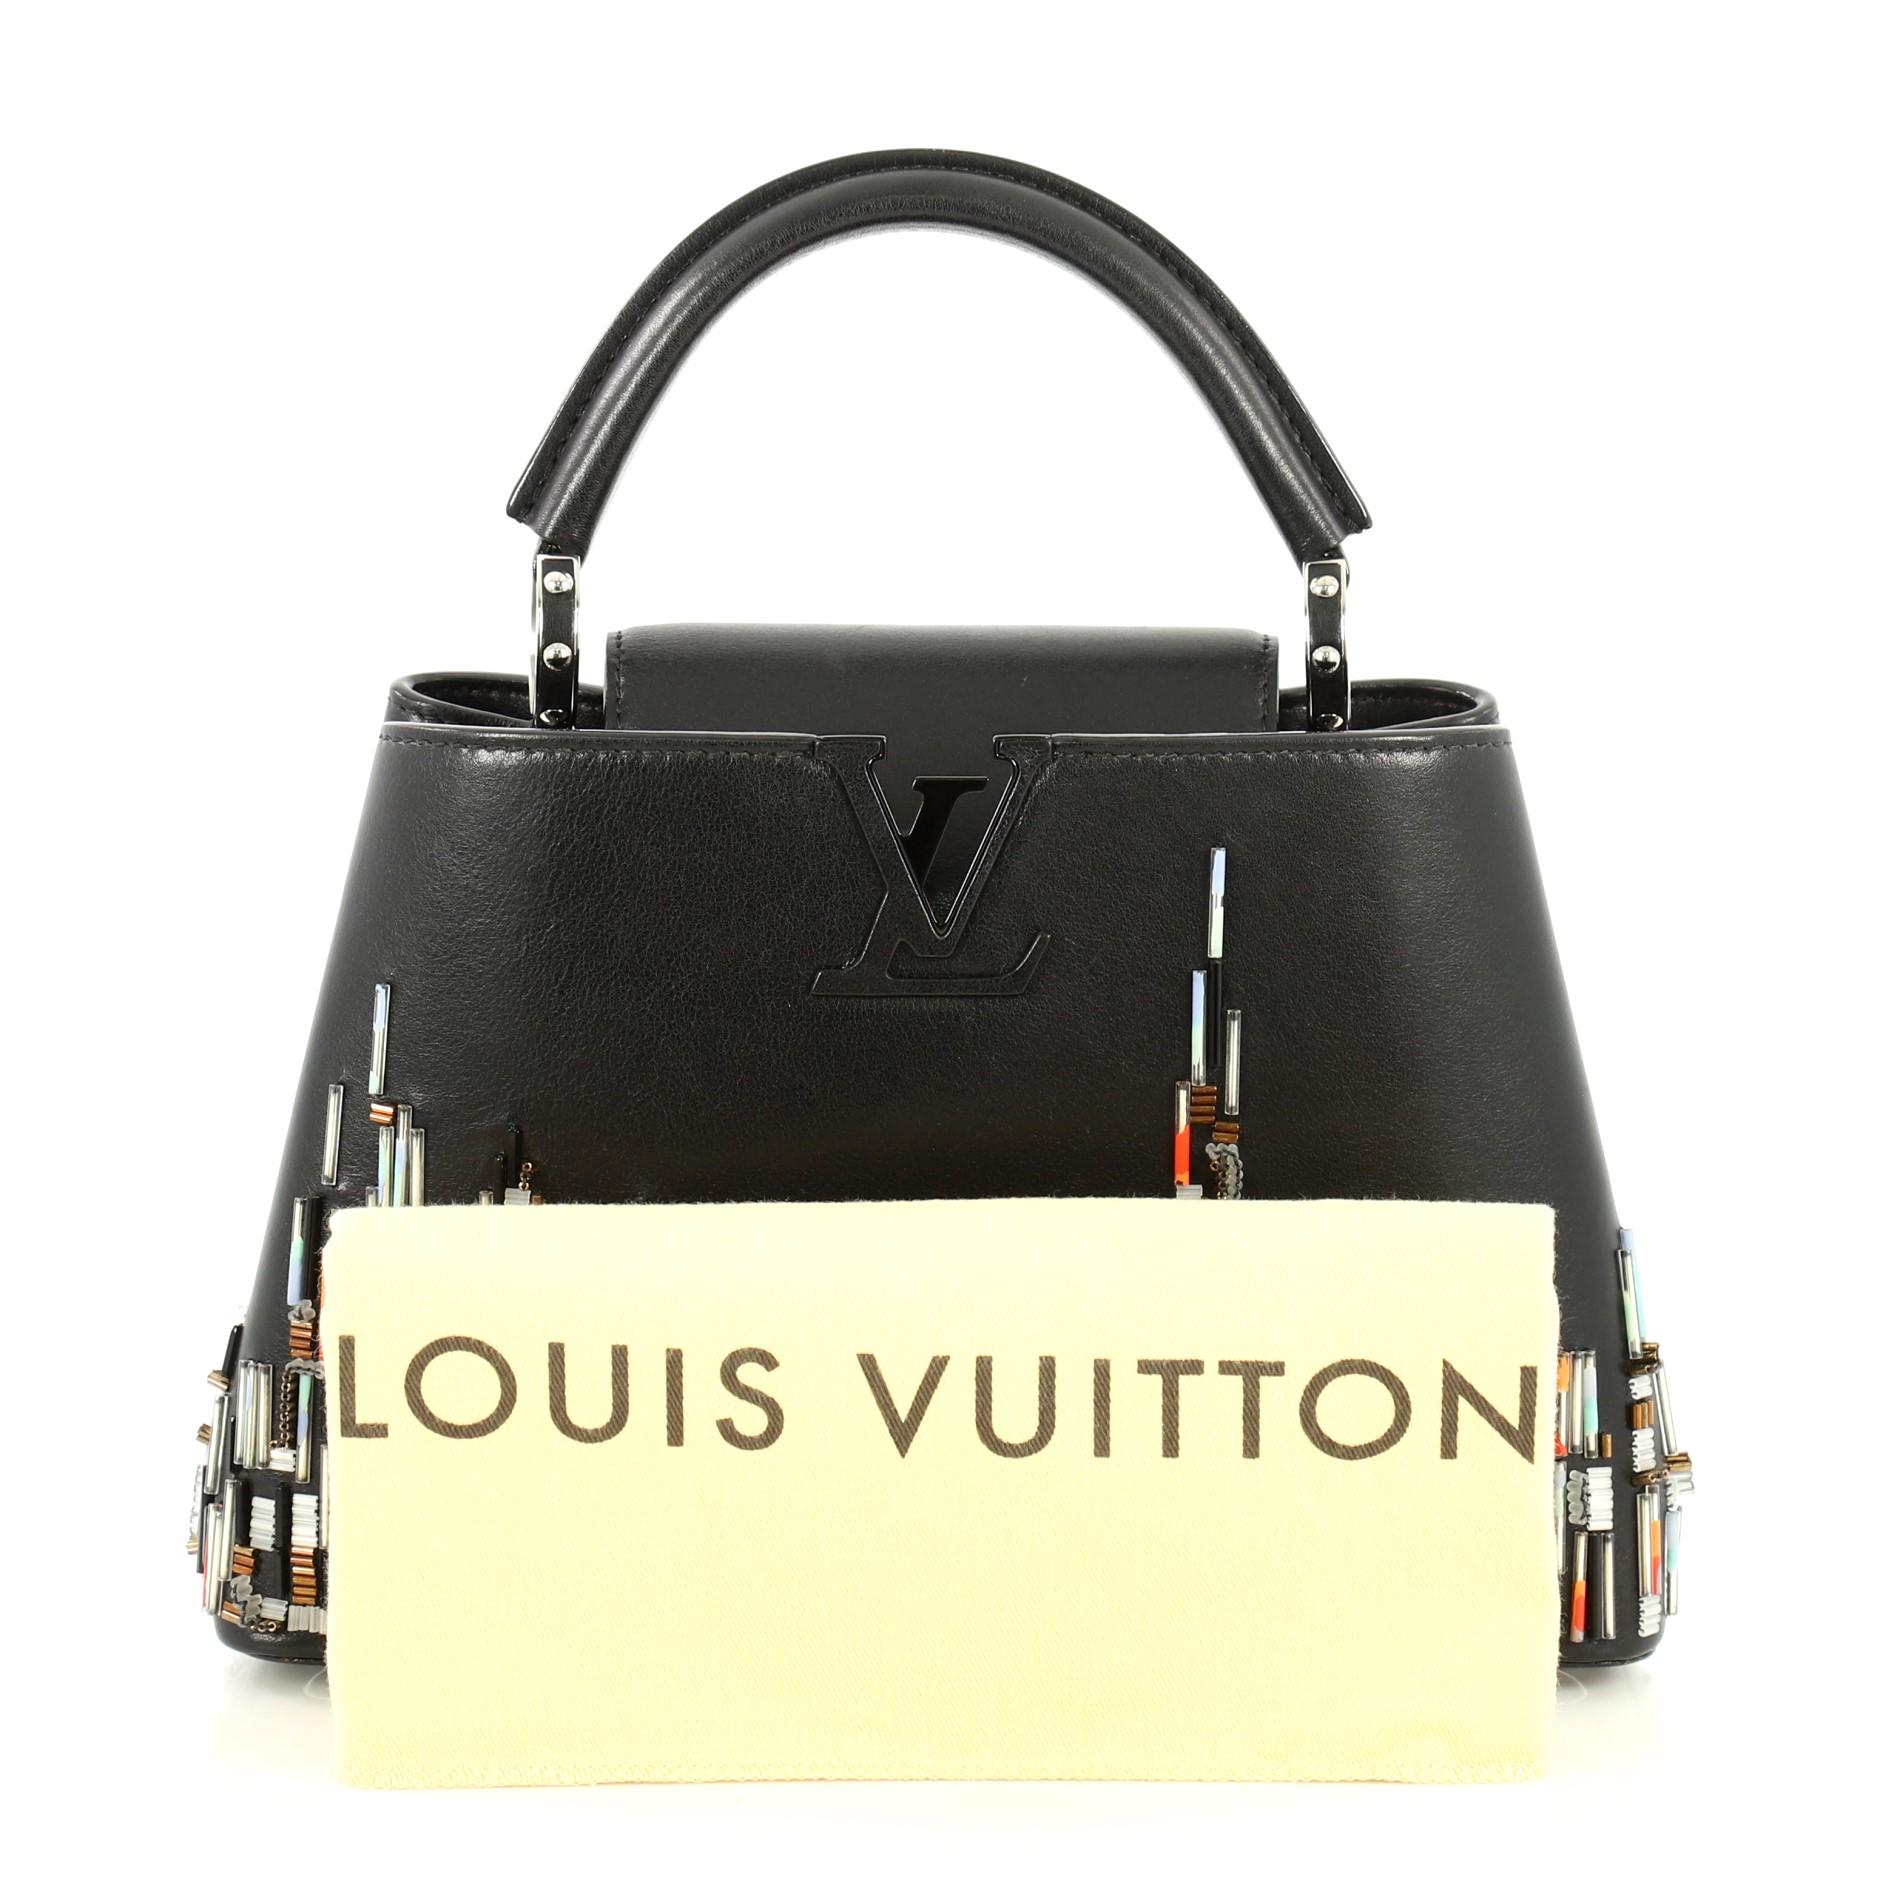 This Louis Vuitton Capucines Handbag Limited Edition City Beaded Leather BB, crafted from black beaded leather, features a single rolled leather handle, frontal flap with the classic monogram flower, and black and silver-tone hardware. Its flap